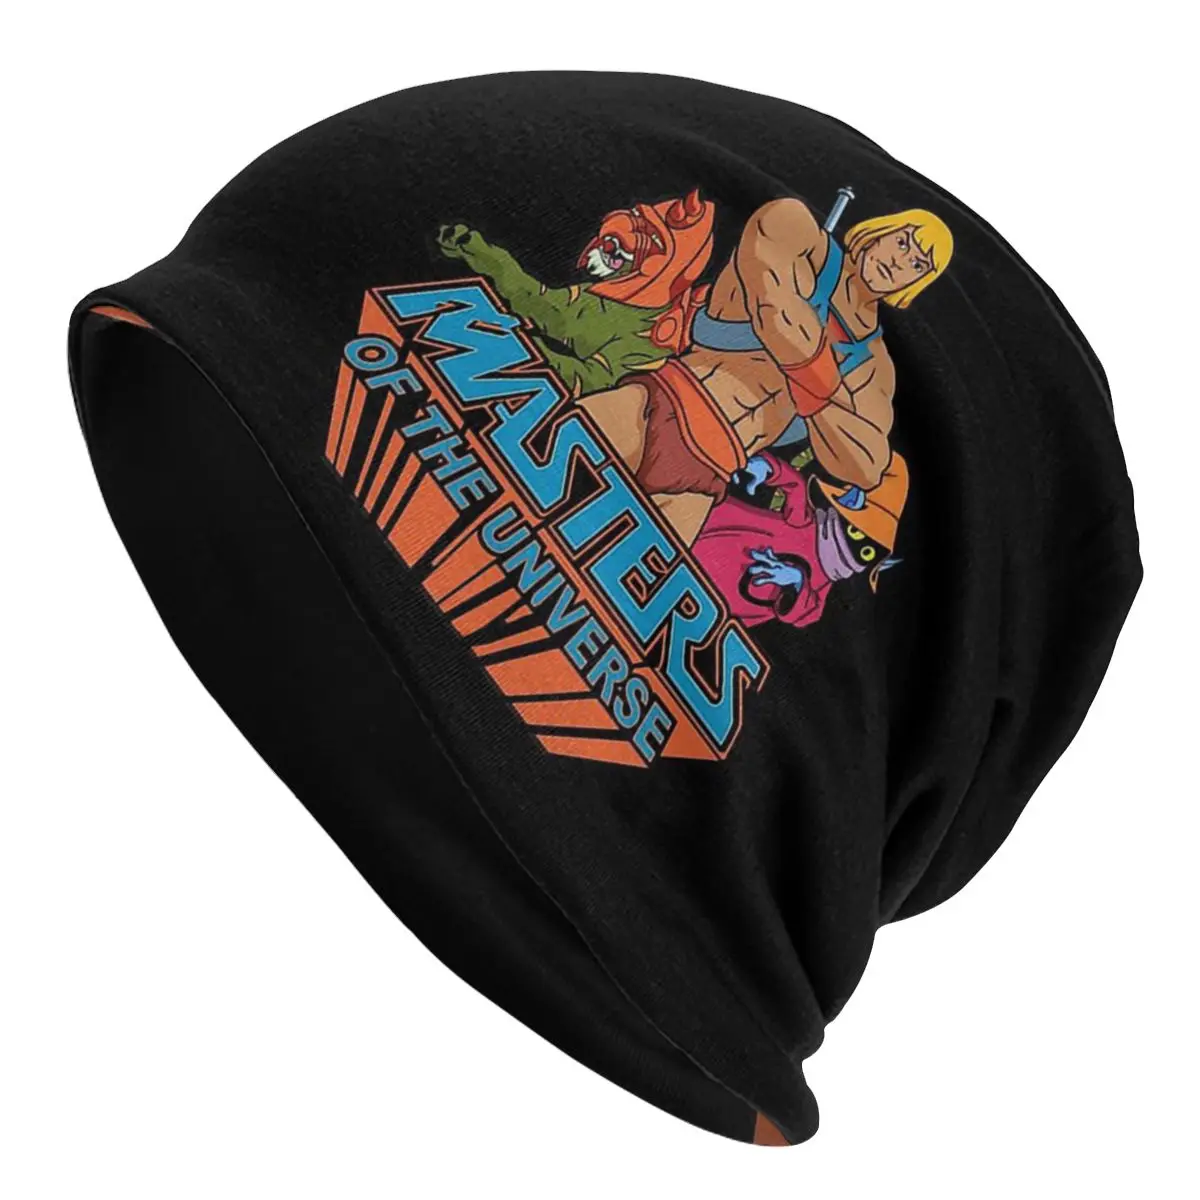 

Funny Outdoor Beanie Caps He Man And The Masters Of The Universe Skullies Beanies Ski Caps Cotton Bonnet Hats